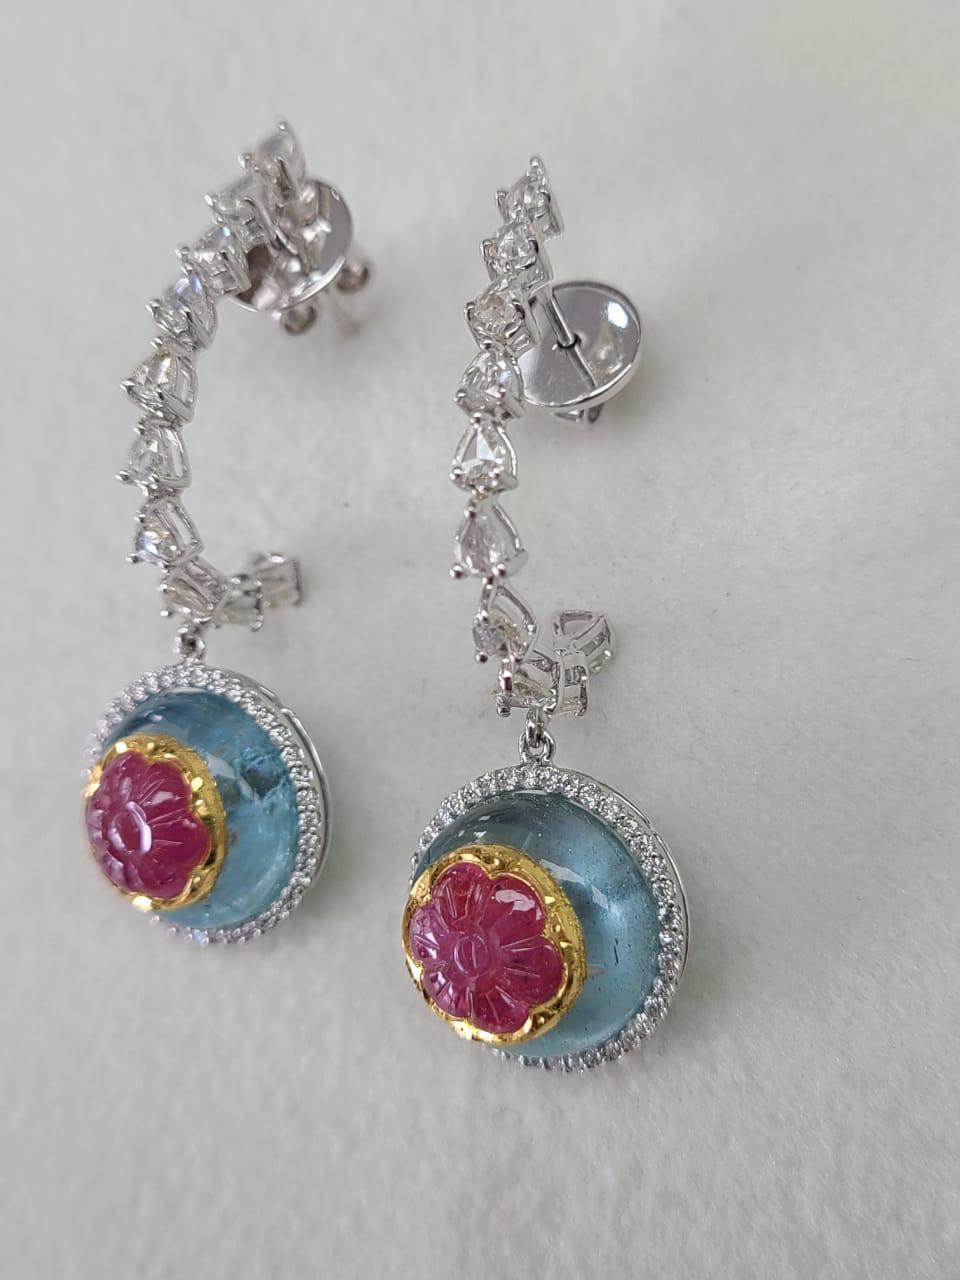 A very special one of a kind, natural Ruby on Aquamarine & Rose Diamonds Chandelier Drop Earrings set in 18K Gold. The Ruby is 